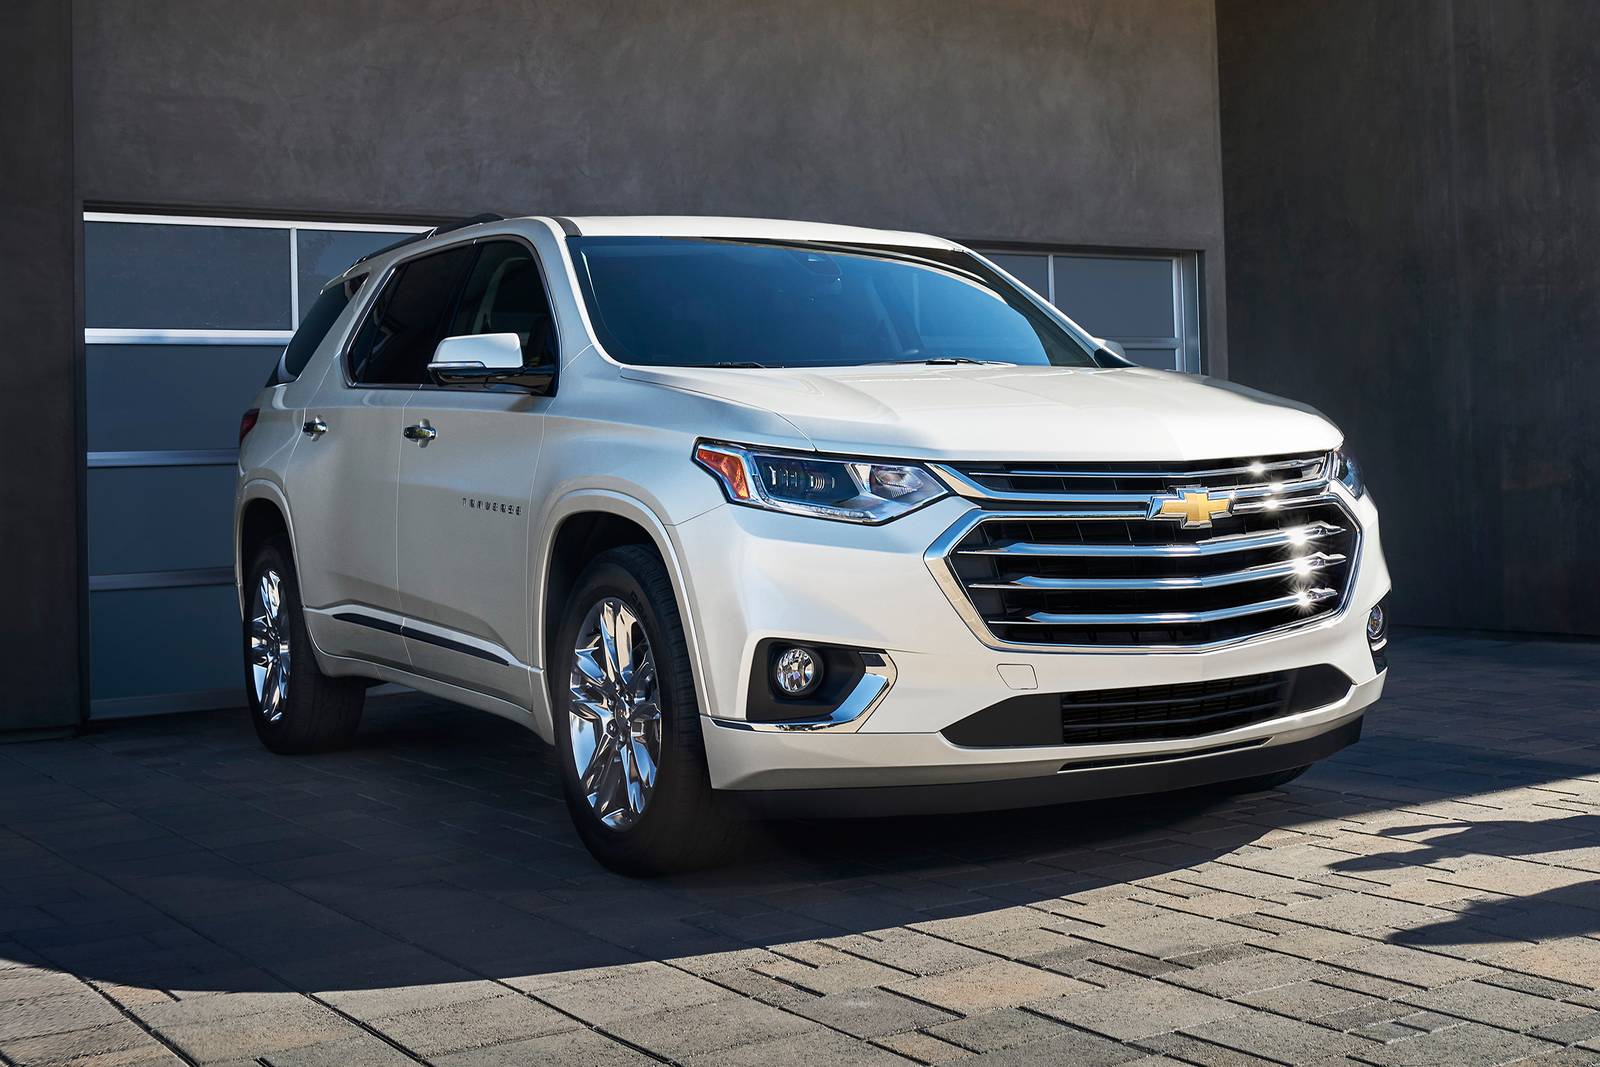 2019 Chevy Traverse Review & Ratings | Edmunds